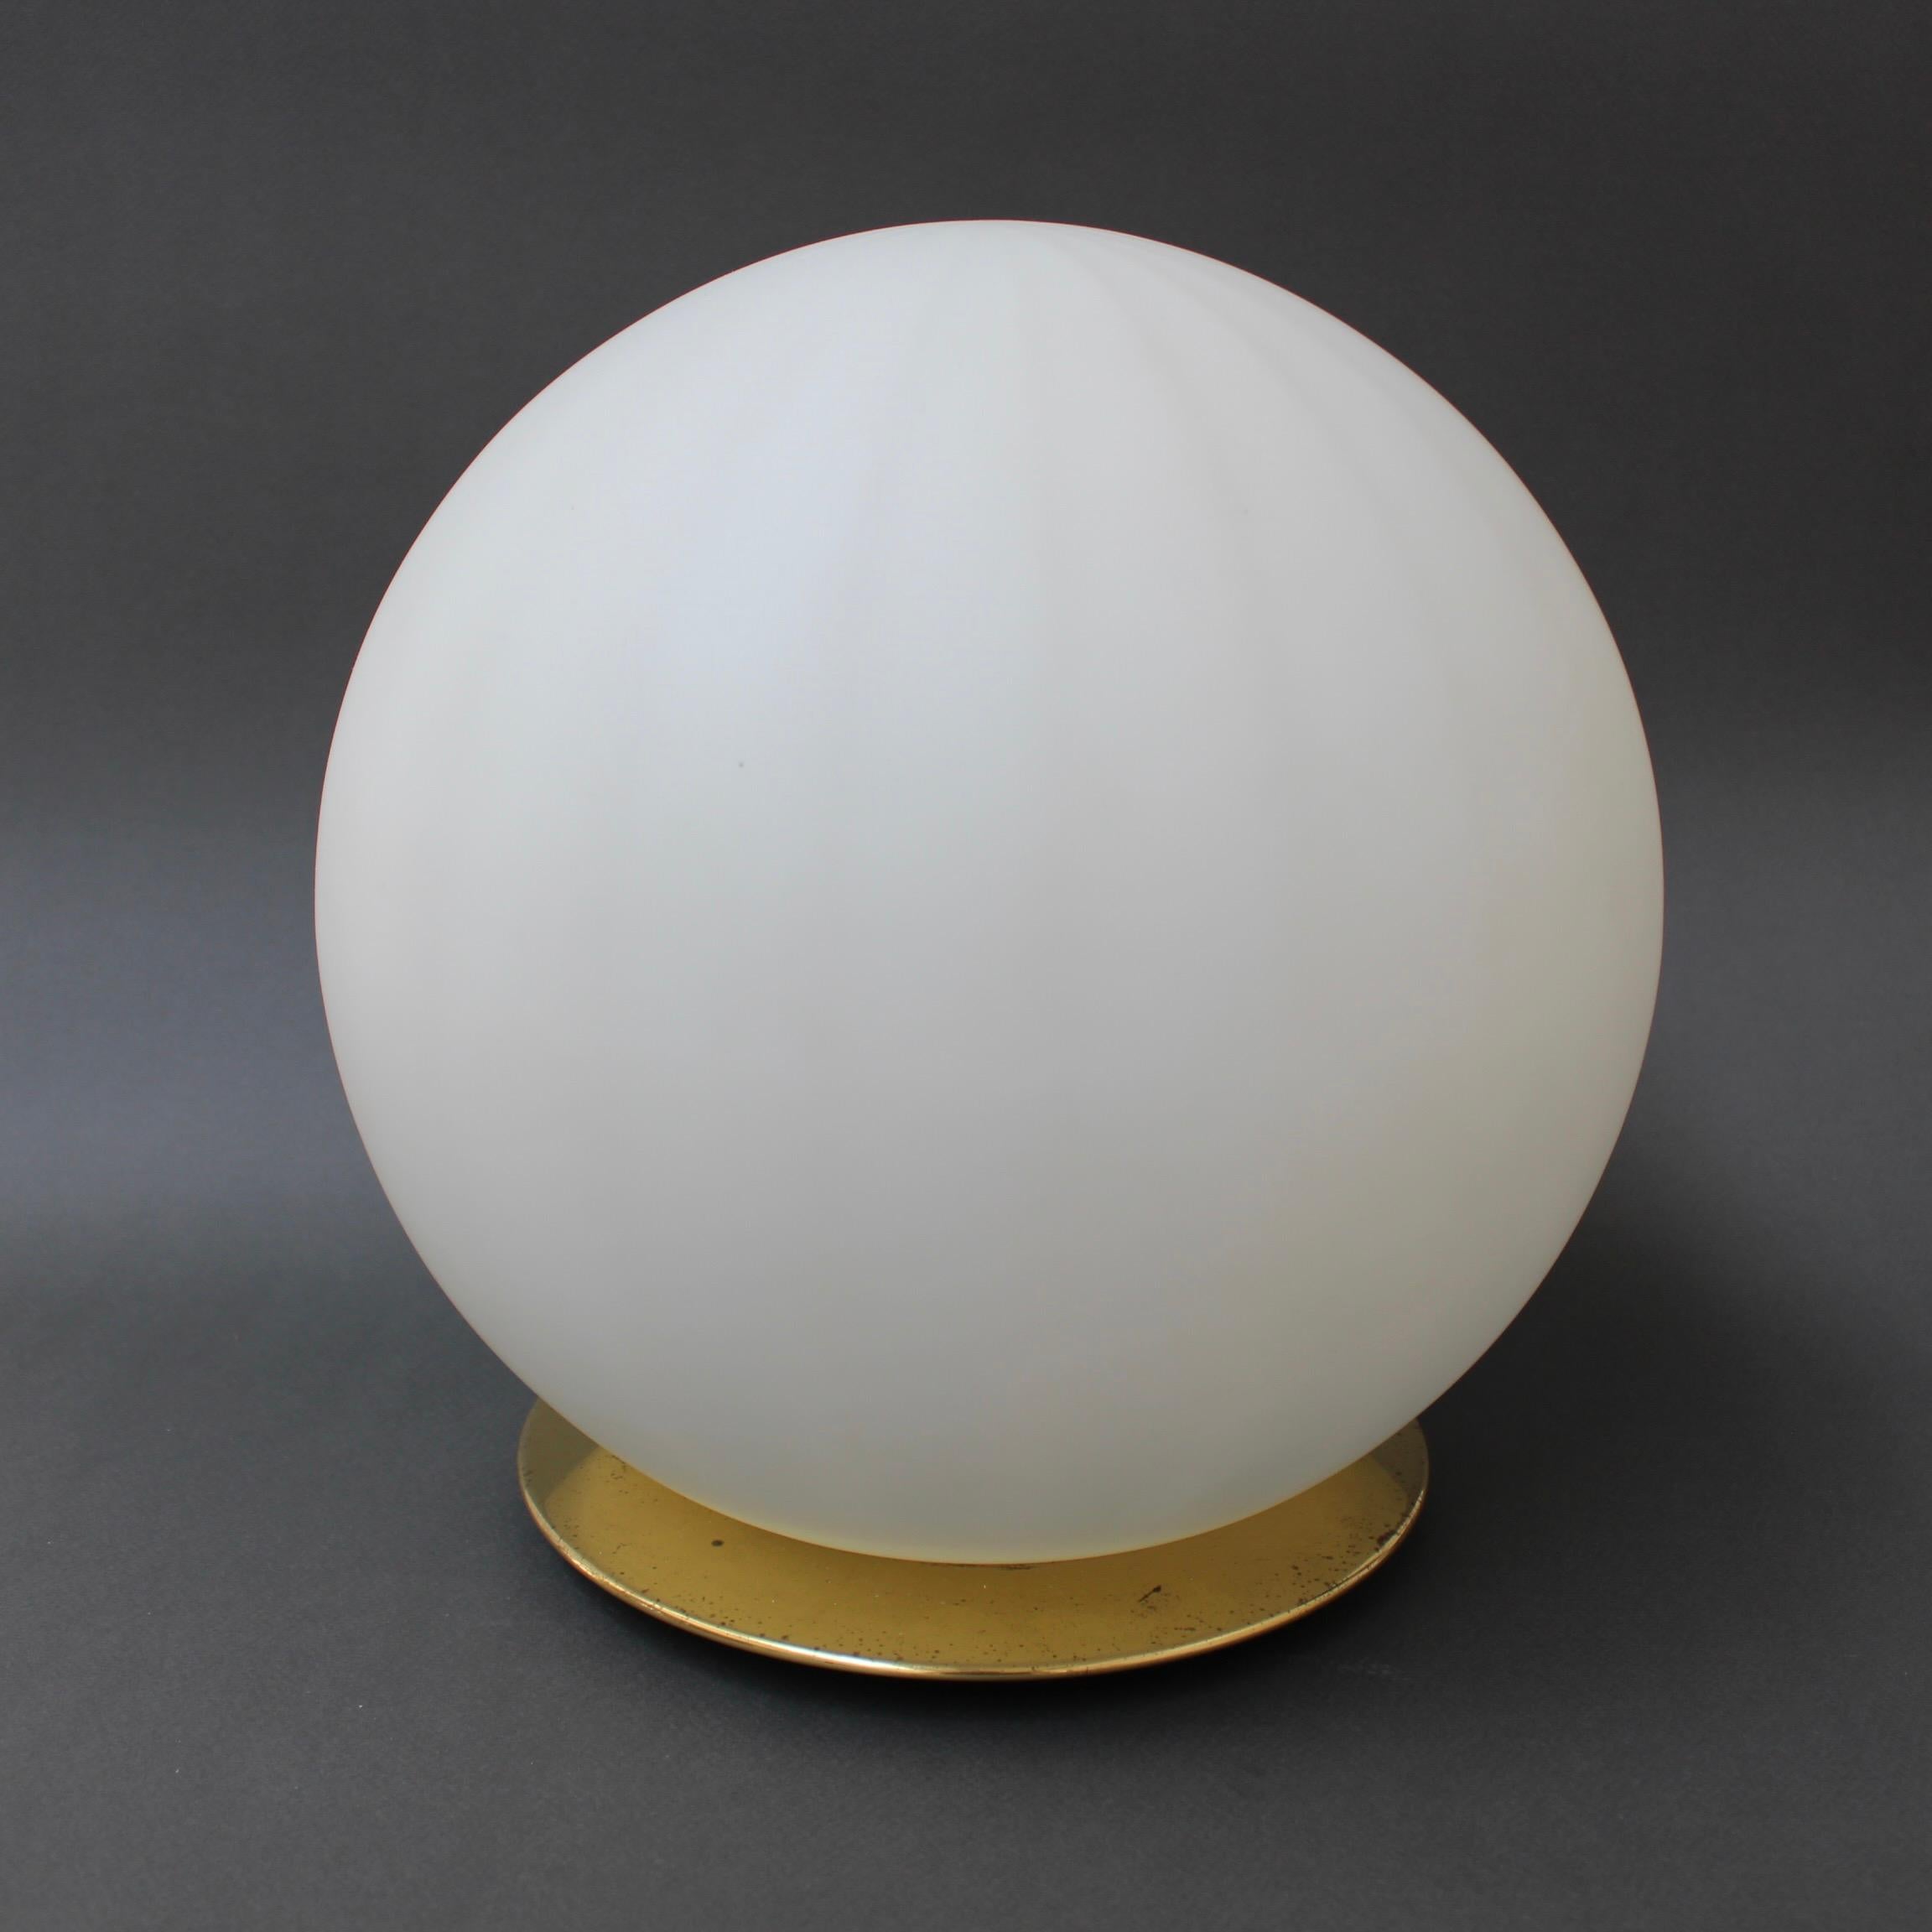 A 1970s Italian Murano glass globe table lamp. Modernist and elegant, this blown Murano table lamp provides a source of lighting which is both utilitarian and decorative. The subtle longitudinal lines both capture and amplify the light's interaction